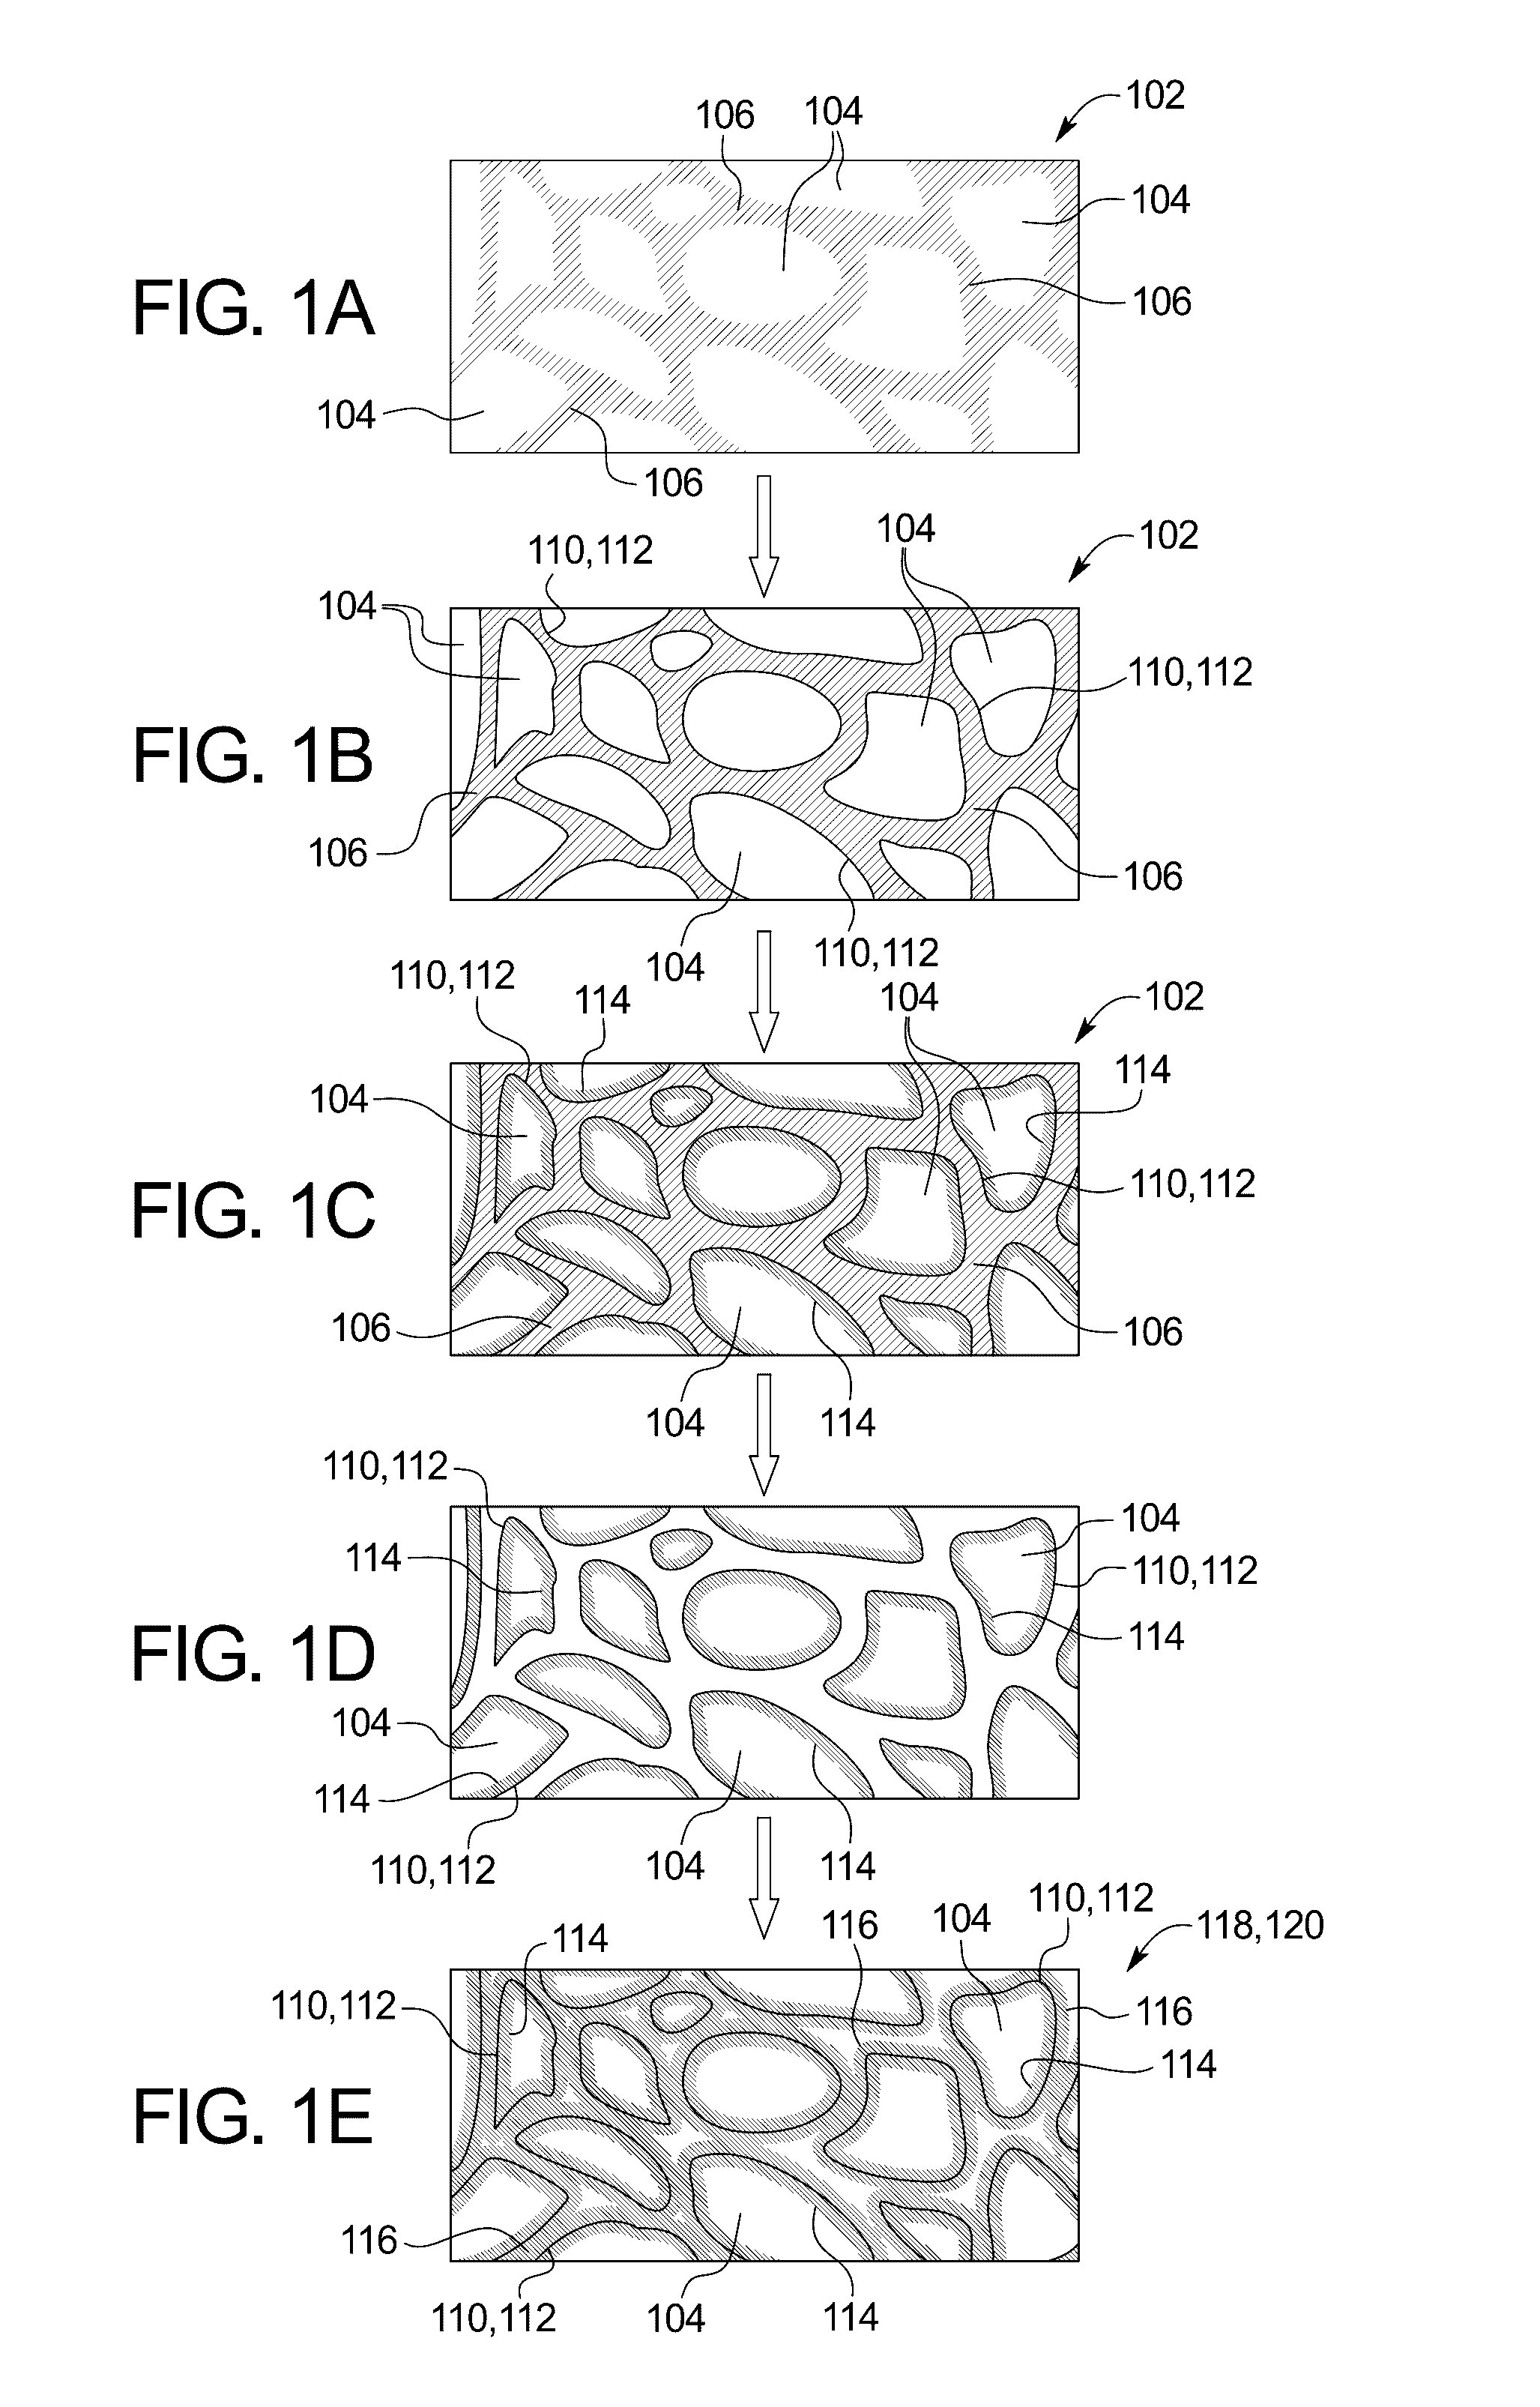 Scaffold-free 3D porous electrode and method of making a scaffold-free 3D porous electrode